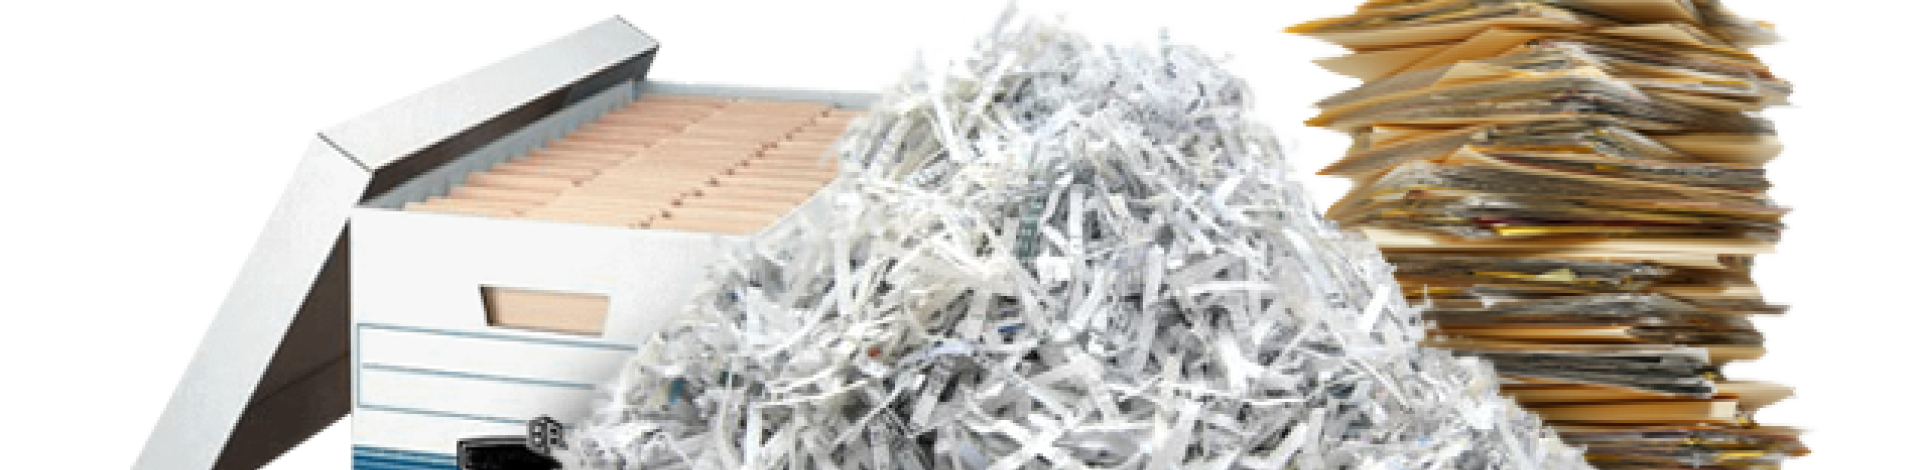 Box of documents and shredded files